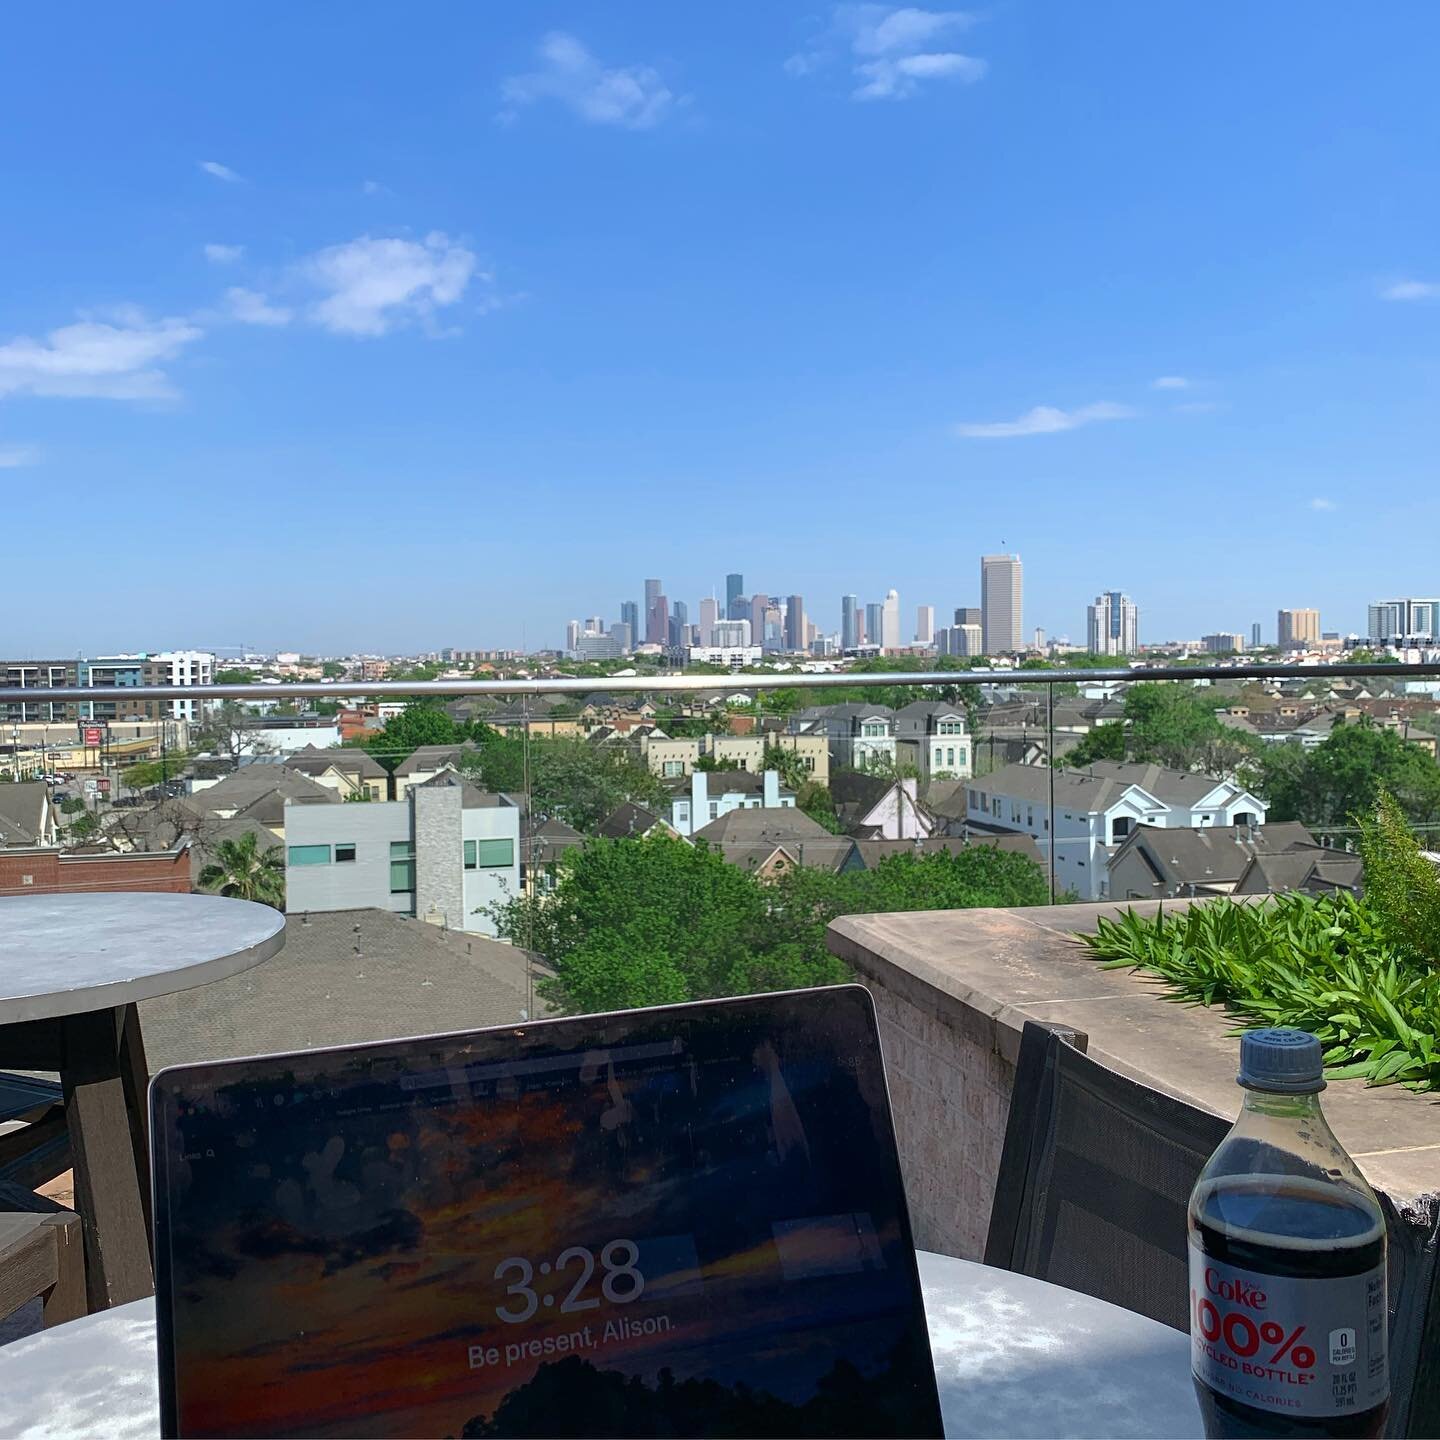 It was a beautiful day to work outside with this amazing view. I will miss being a short walk away from this when I move to Austin! 

⁣
.⁣
.⁣
.⁣
.⁣
.⁣
#workfromanywhere #wfh #amazingview #houstontexas #htown #htx #work #entrepreneurship #motivation #